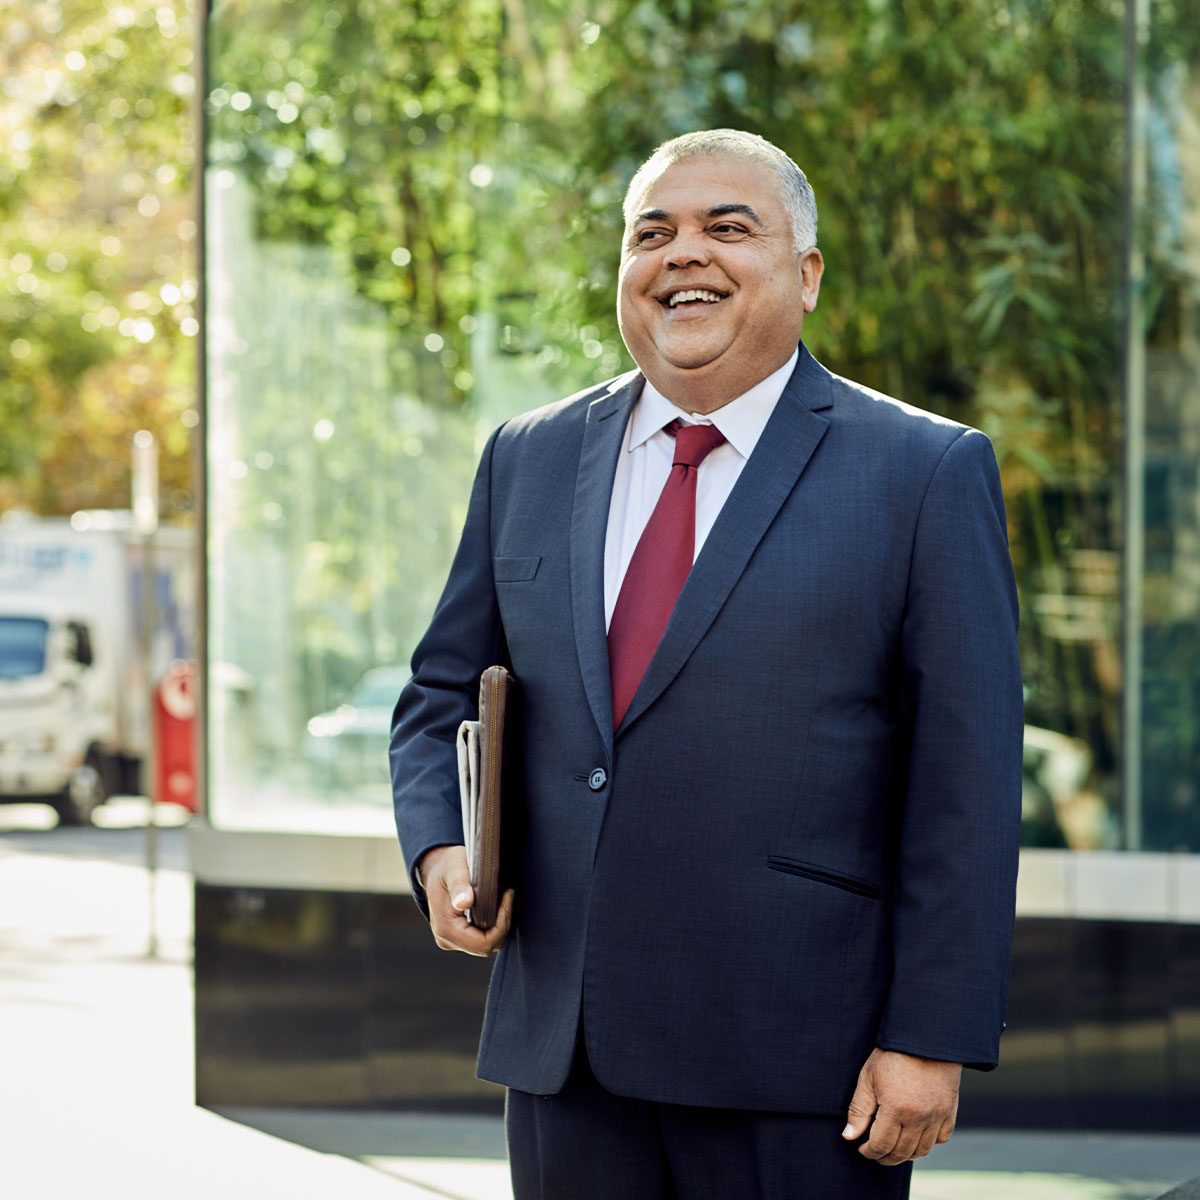 Professionally dressed business man smiling and standing outside while holding documents - Macquarie customer Francis